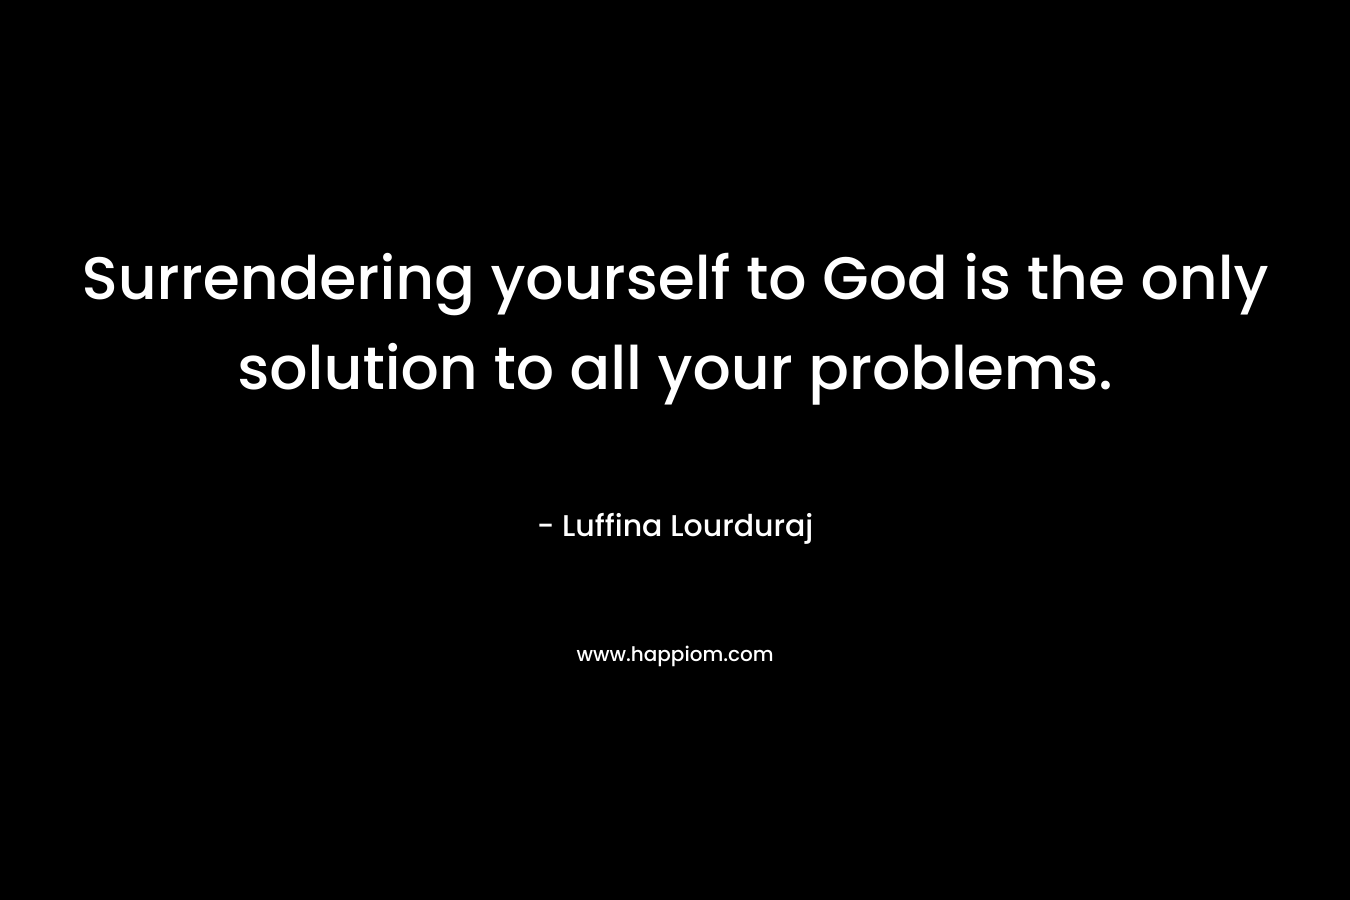 Surrendering yourself to God is the only solution to all your problems. – Luffina Lourduraj